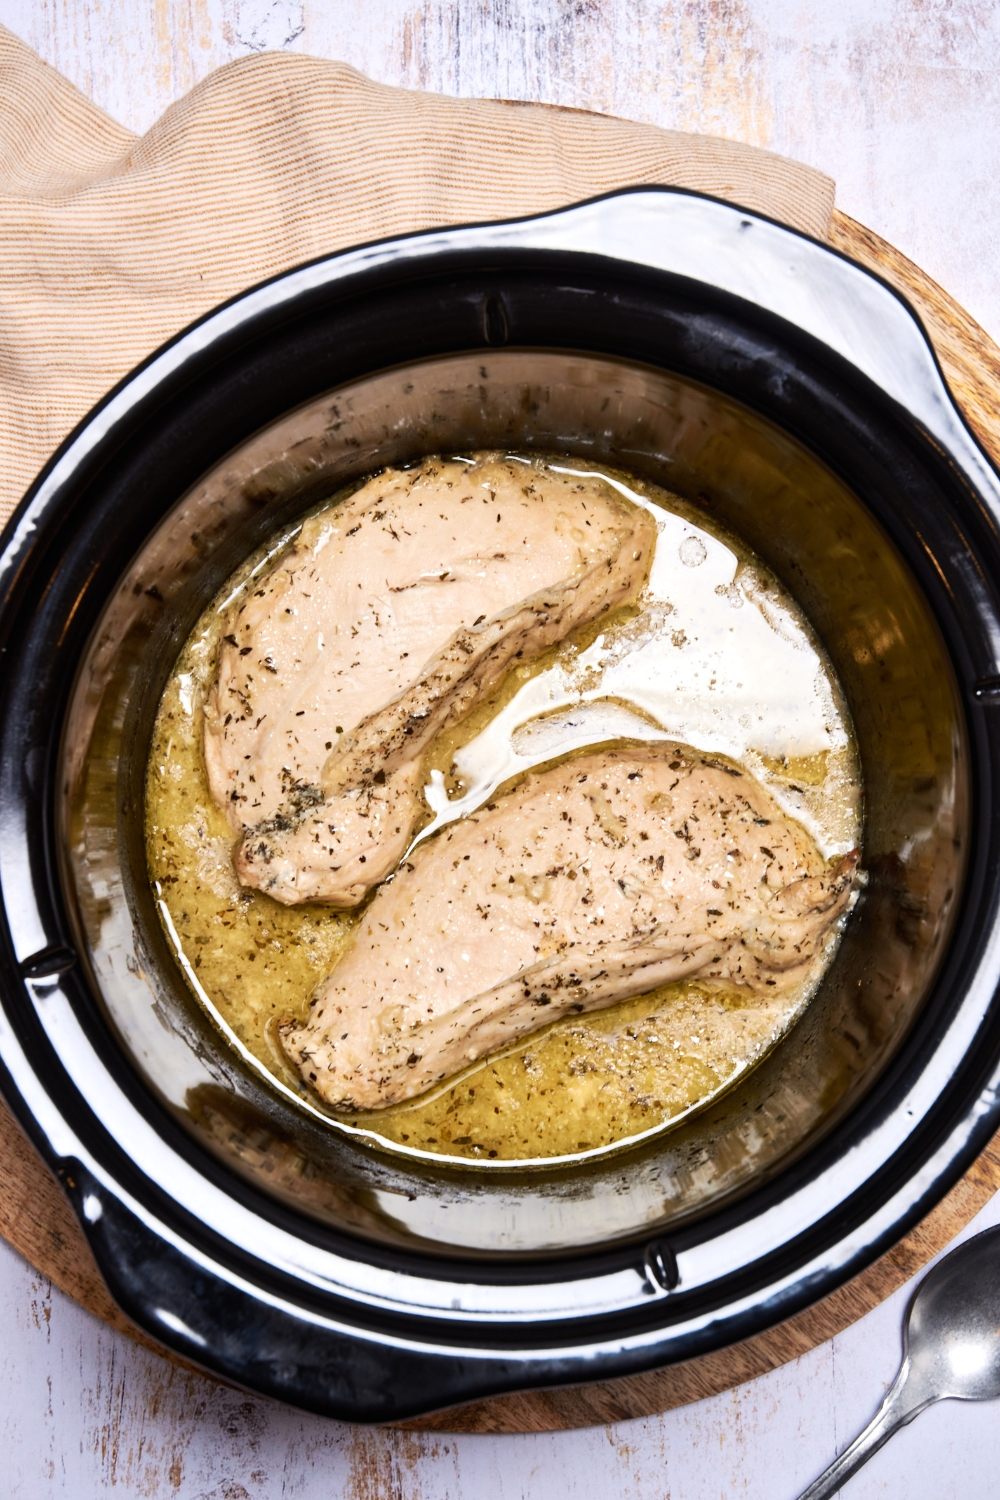 A crockpot with cooked turkey breast in a melty butter sauce.